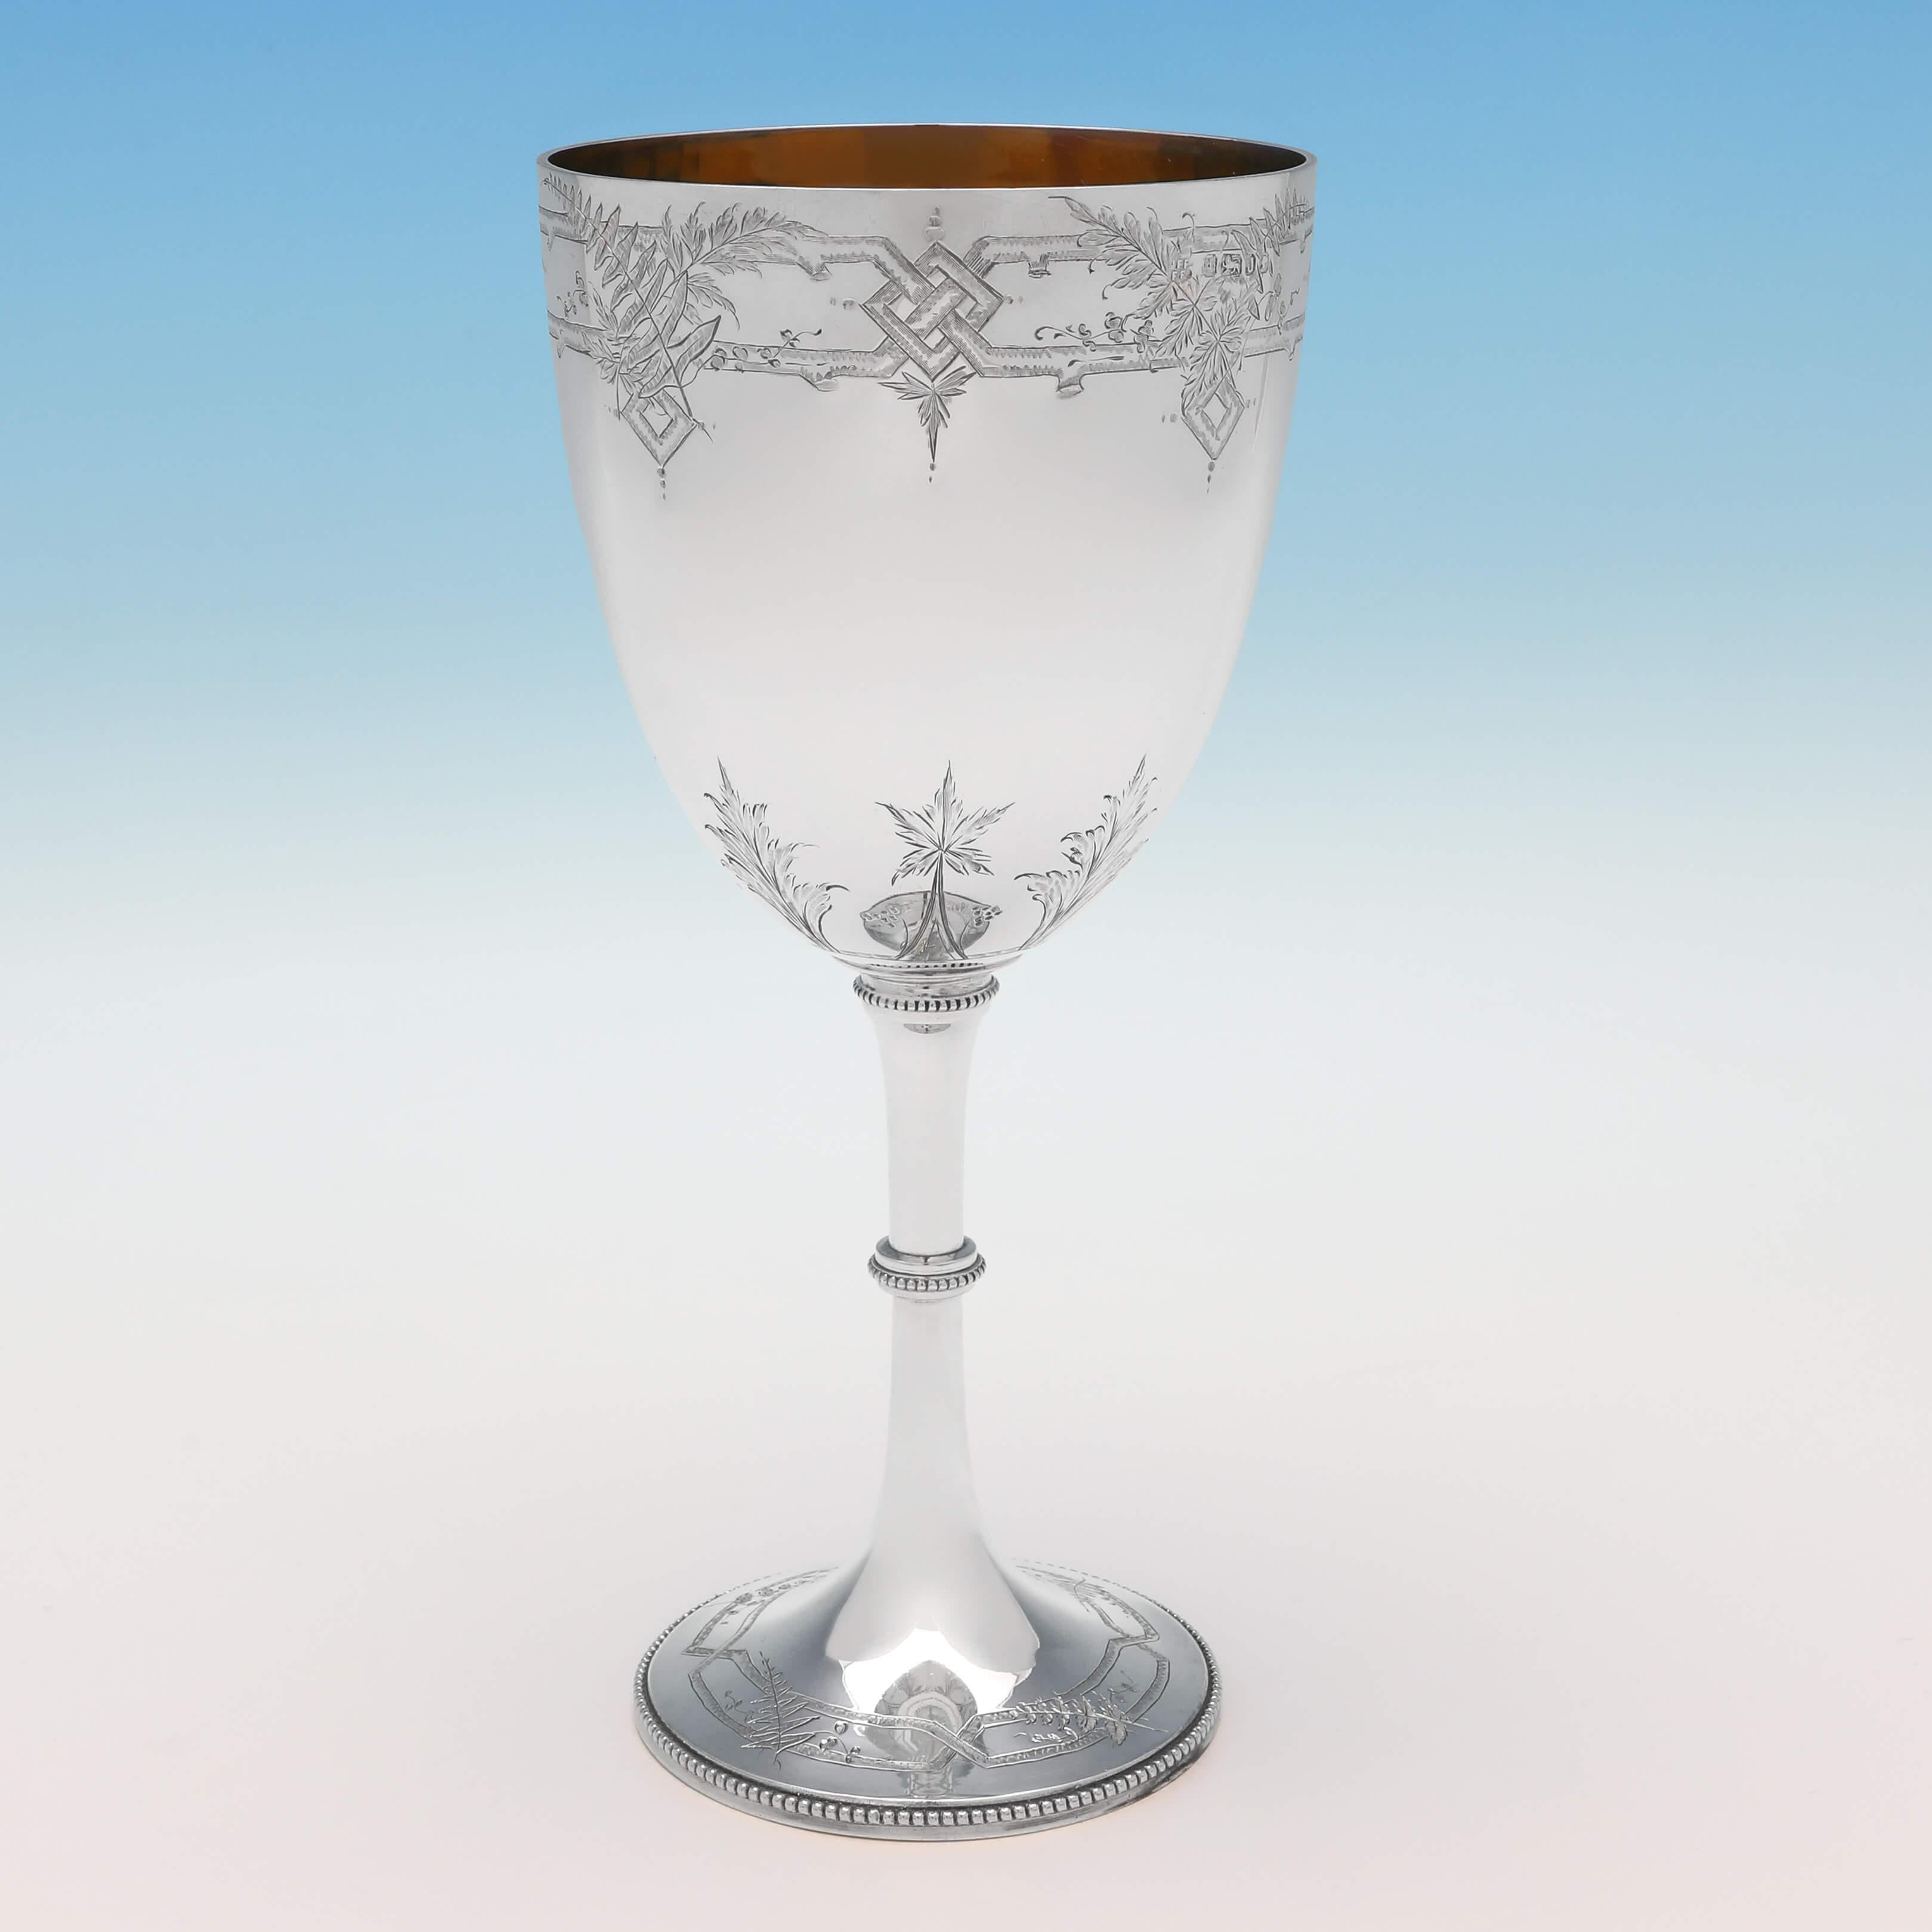 Hallmarked in Sheffield in 1876 by Fenton Brothers Ltd., this very attractive, Victorian, antique sterling silver goblet, features engraved bands of naturalistic detailing, bead borders, and a gilt interior. The goblet measures 8